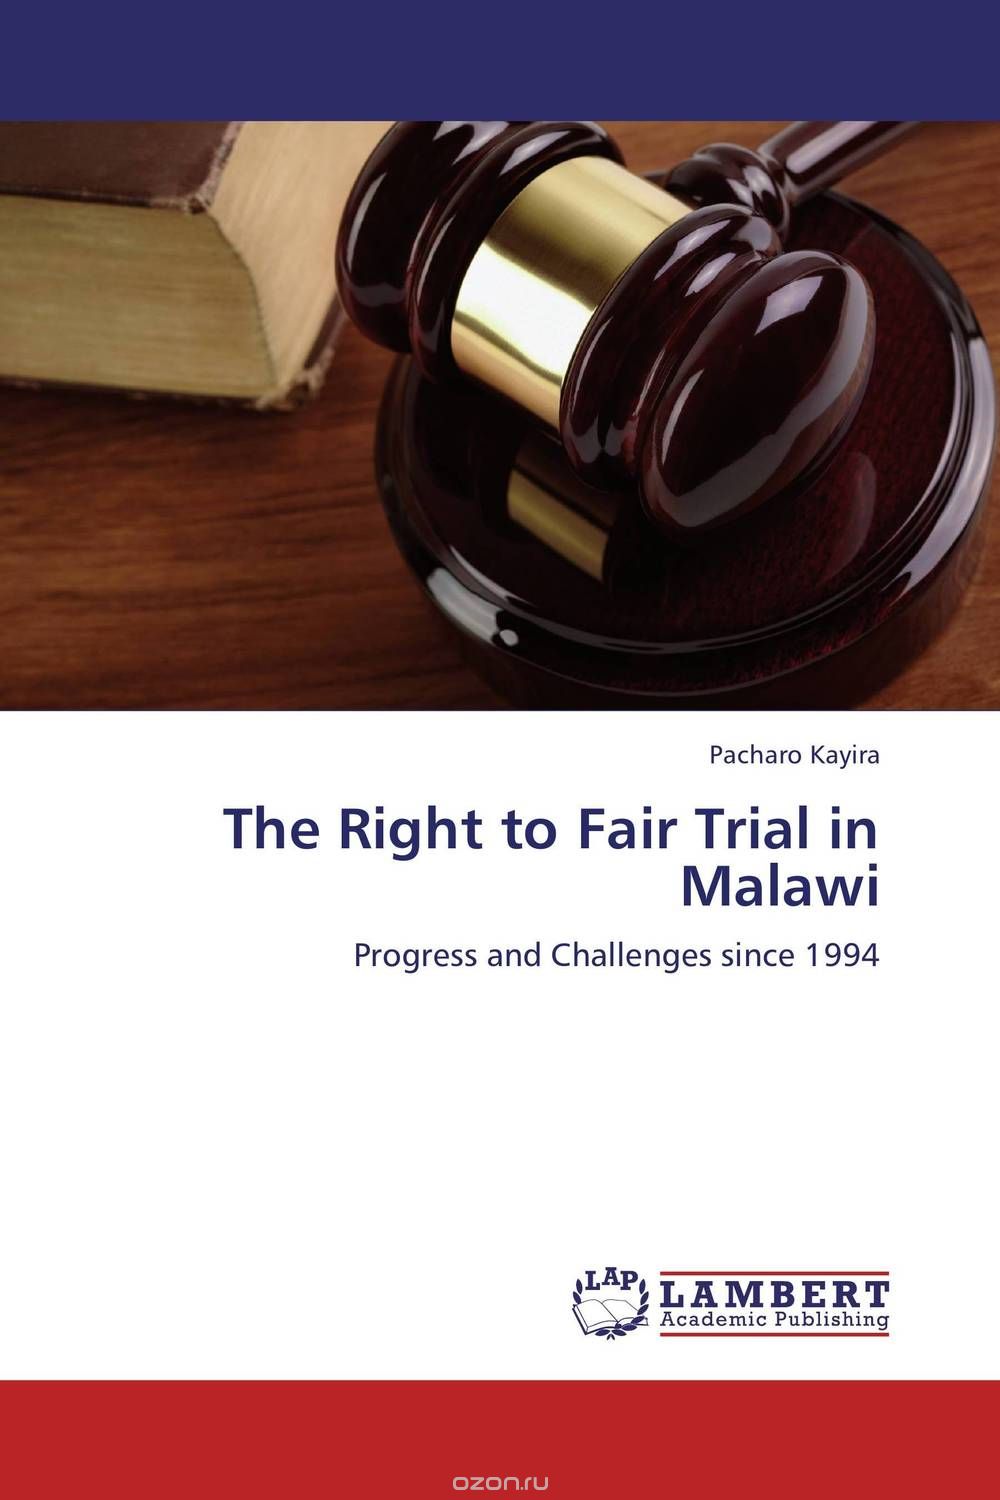 Скачать книгу "The Right to Fair Trial in Malawi"